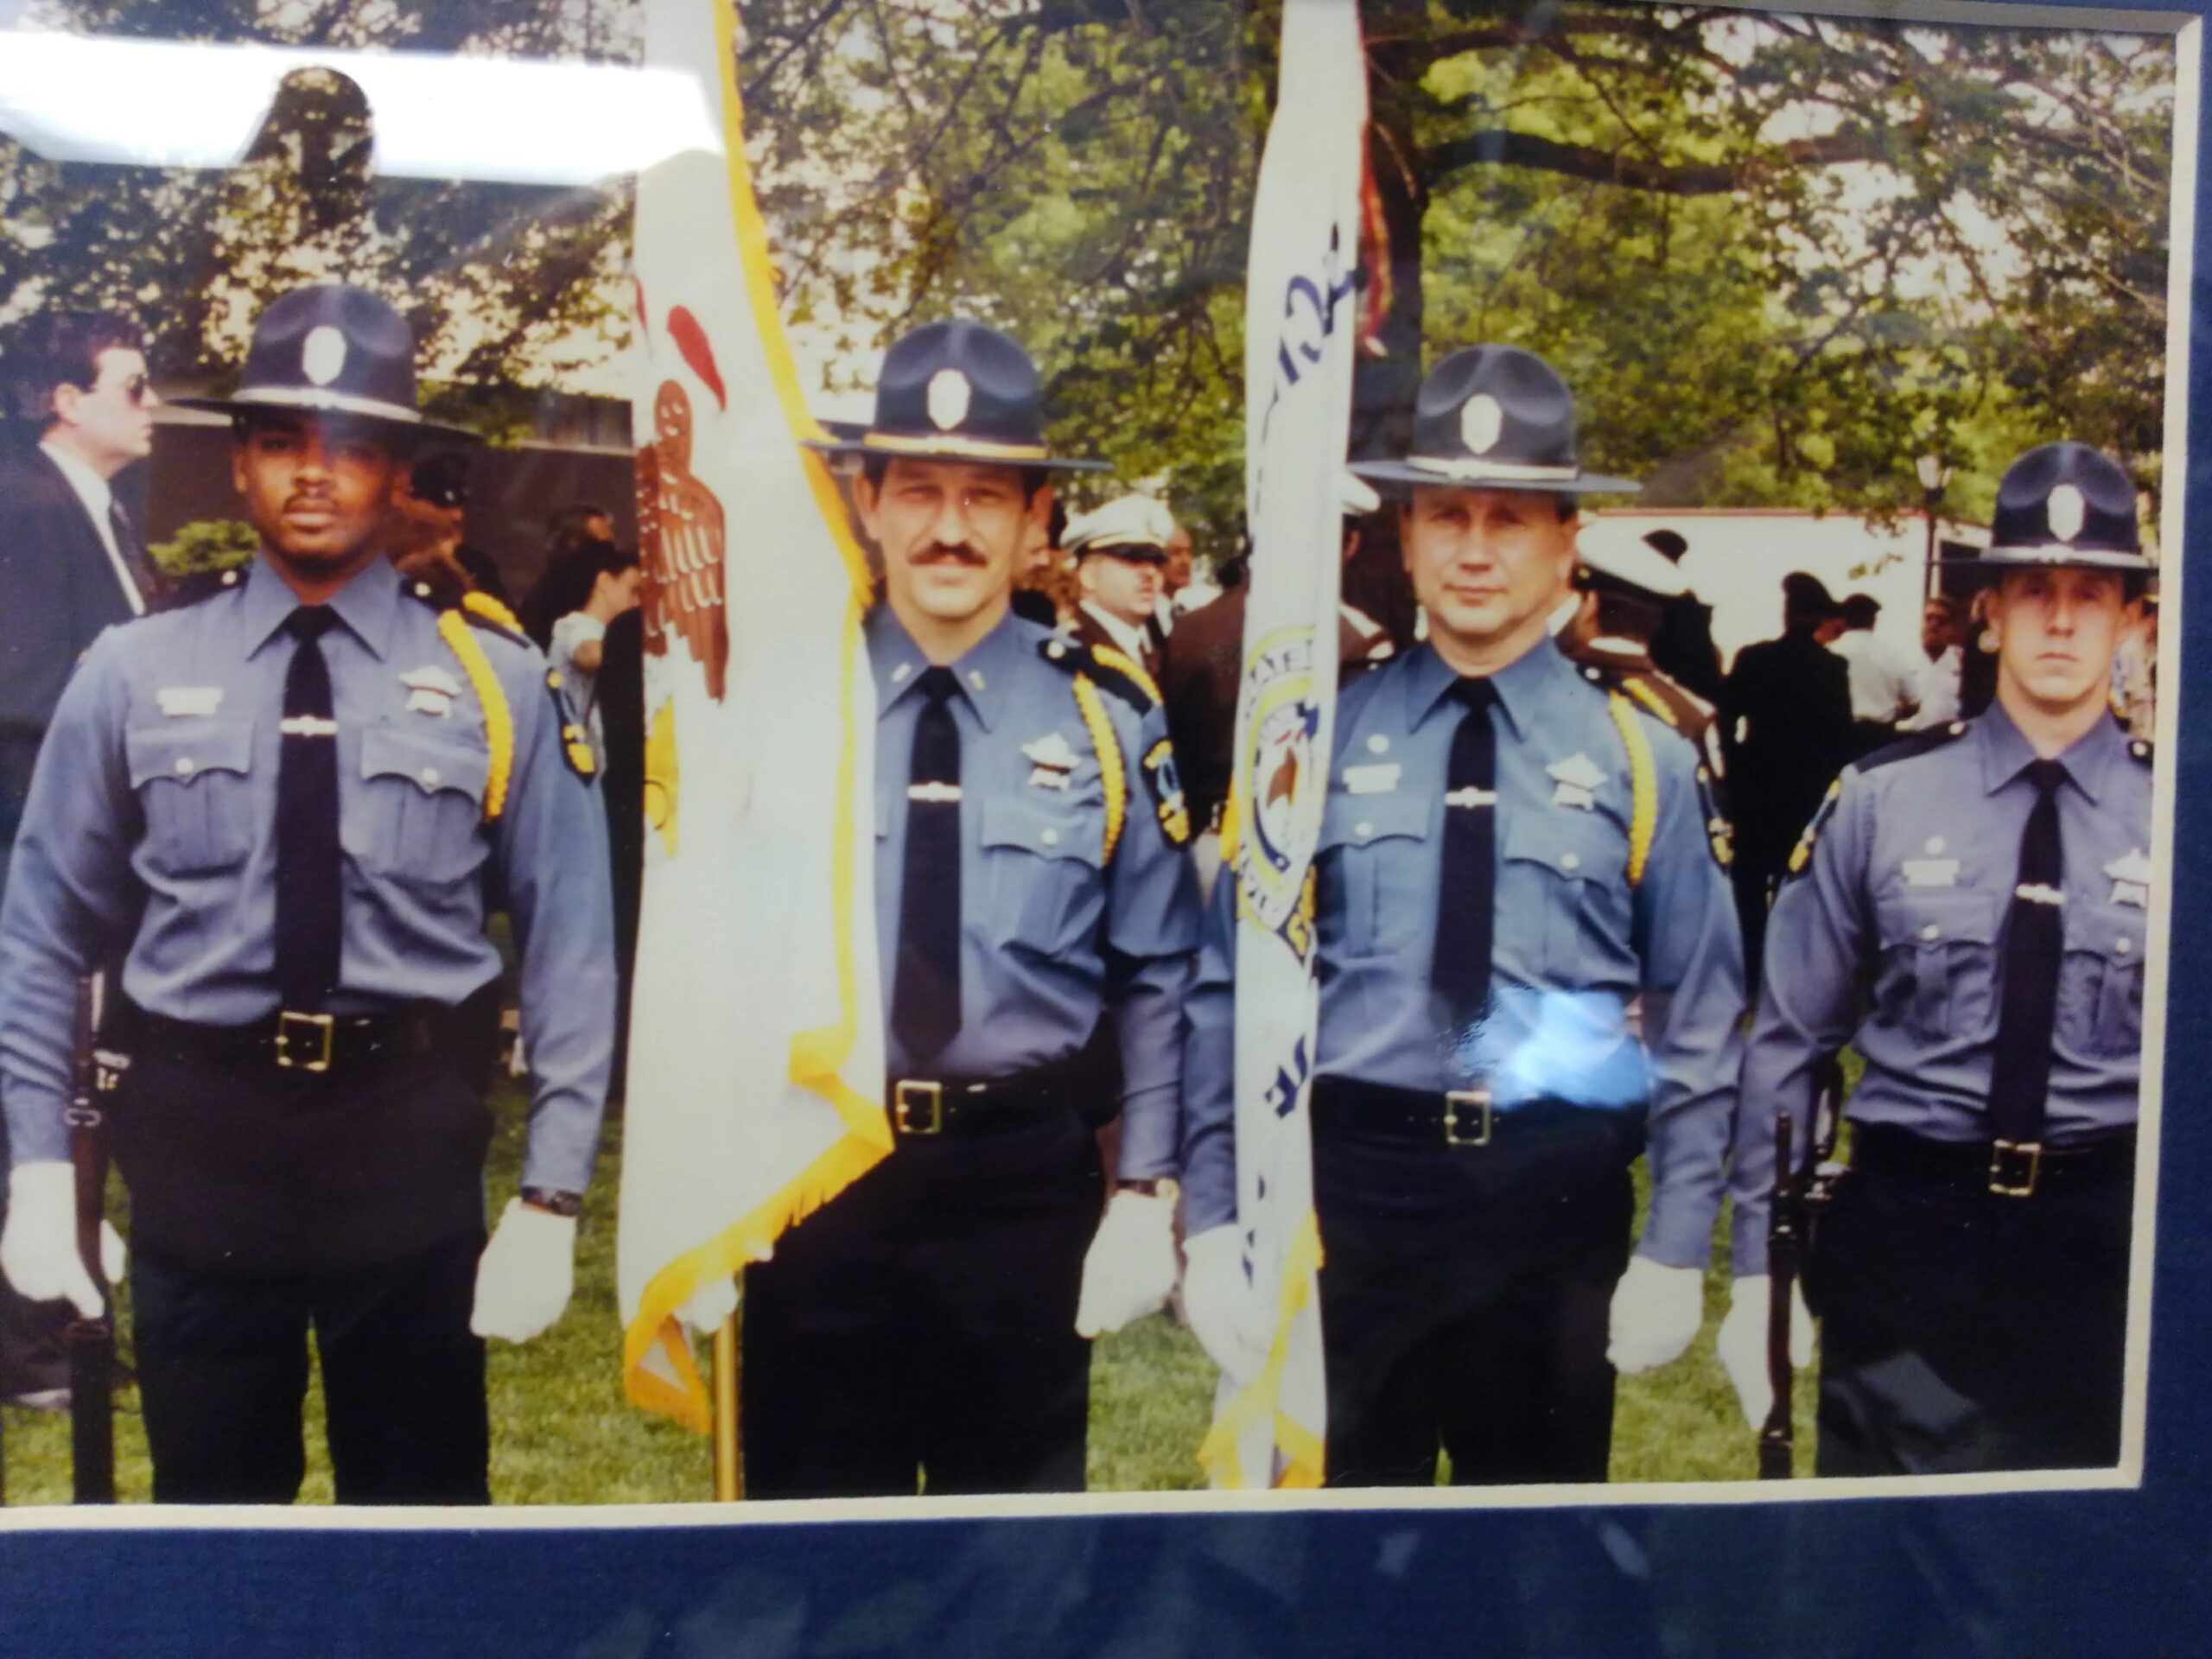 FOP - SOS POLICEHONOR GUARD FROM THE 1990'S